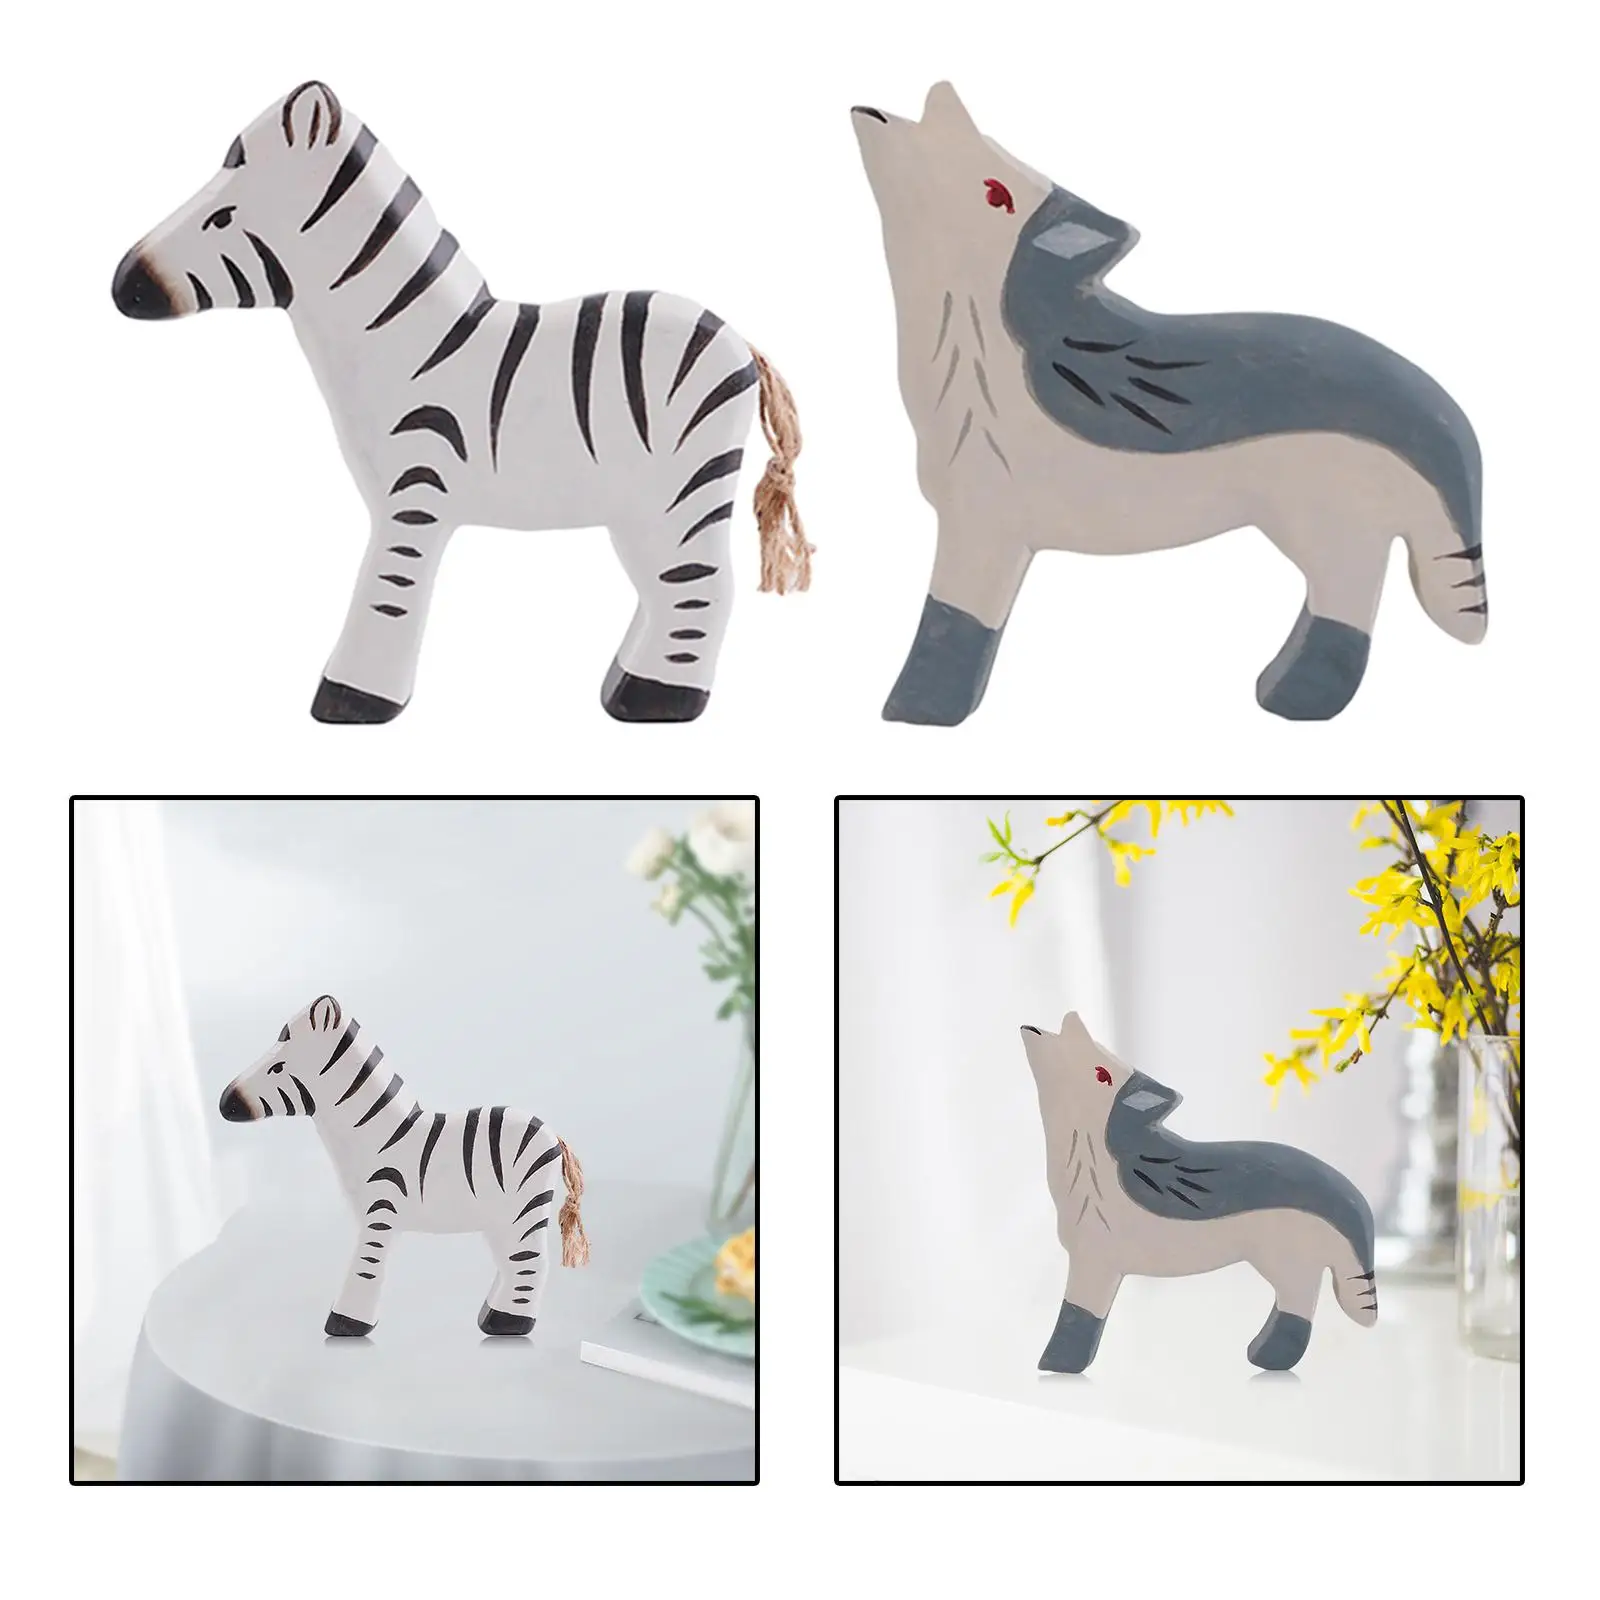 2x Simulation Animal Learning Toys Figurines Figures Model Collection Animal Playset for Kids Children Toddlers Boys Girls